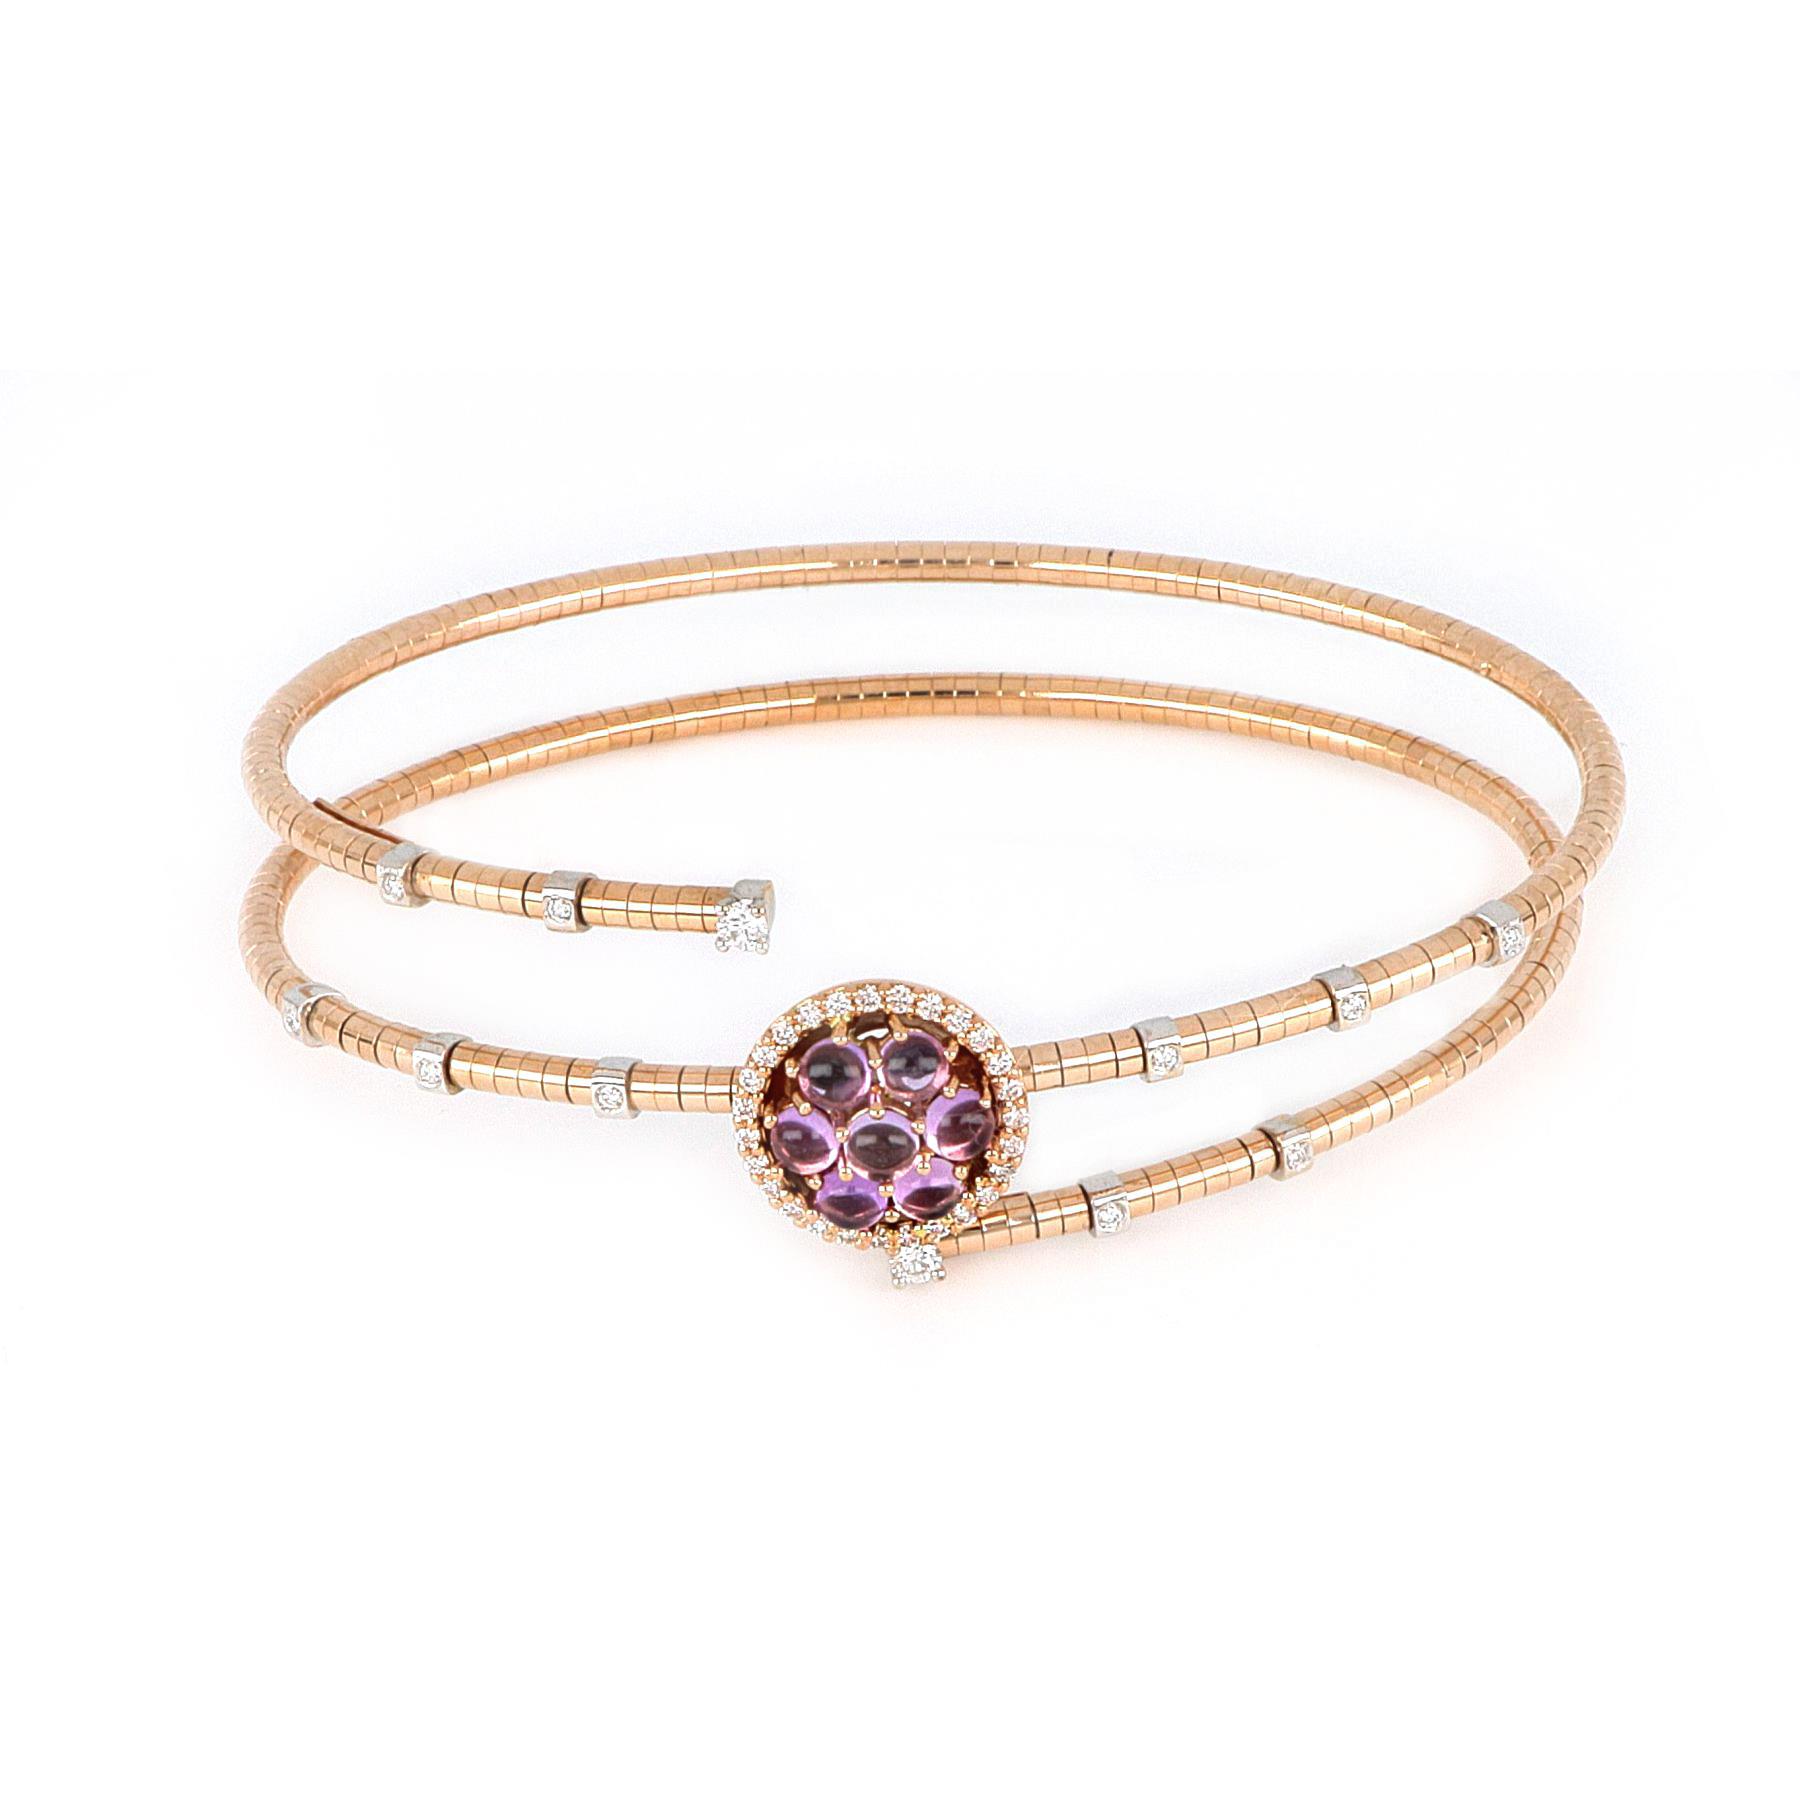 Bangle in rose gold and white gold with amethyst and diamonds - GOLD ART